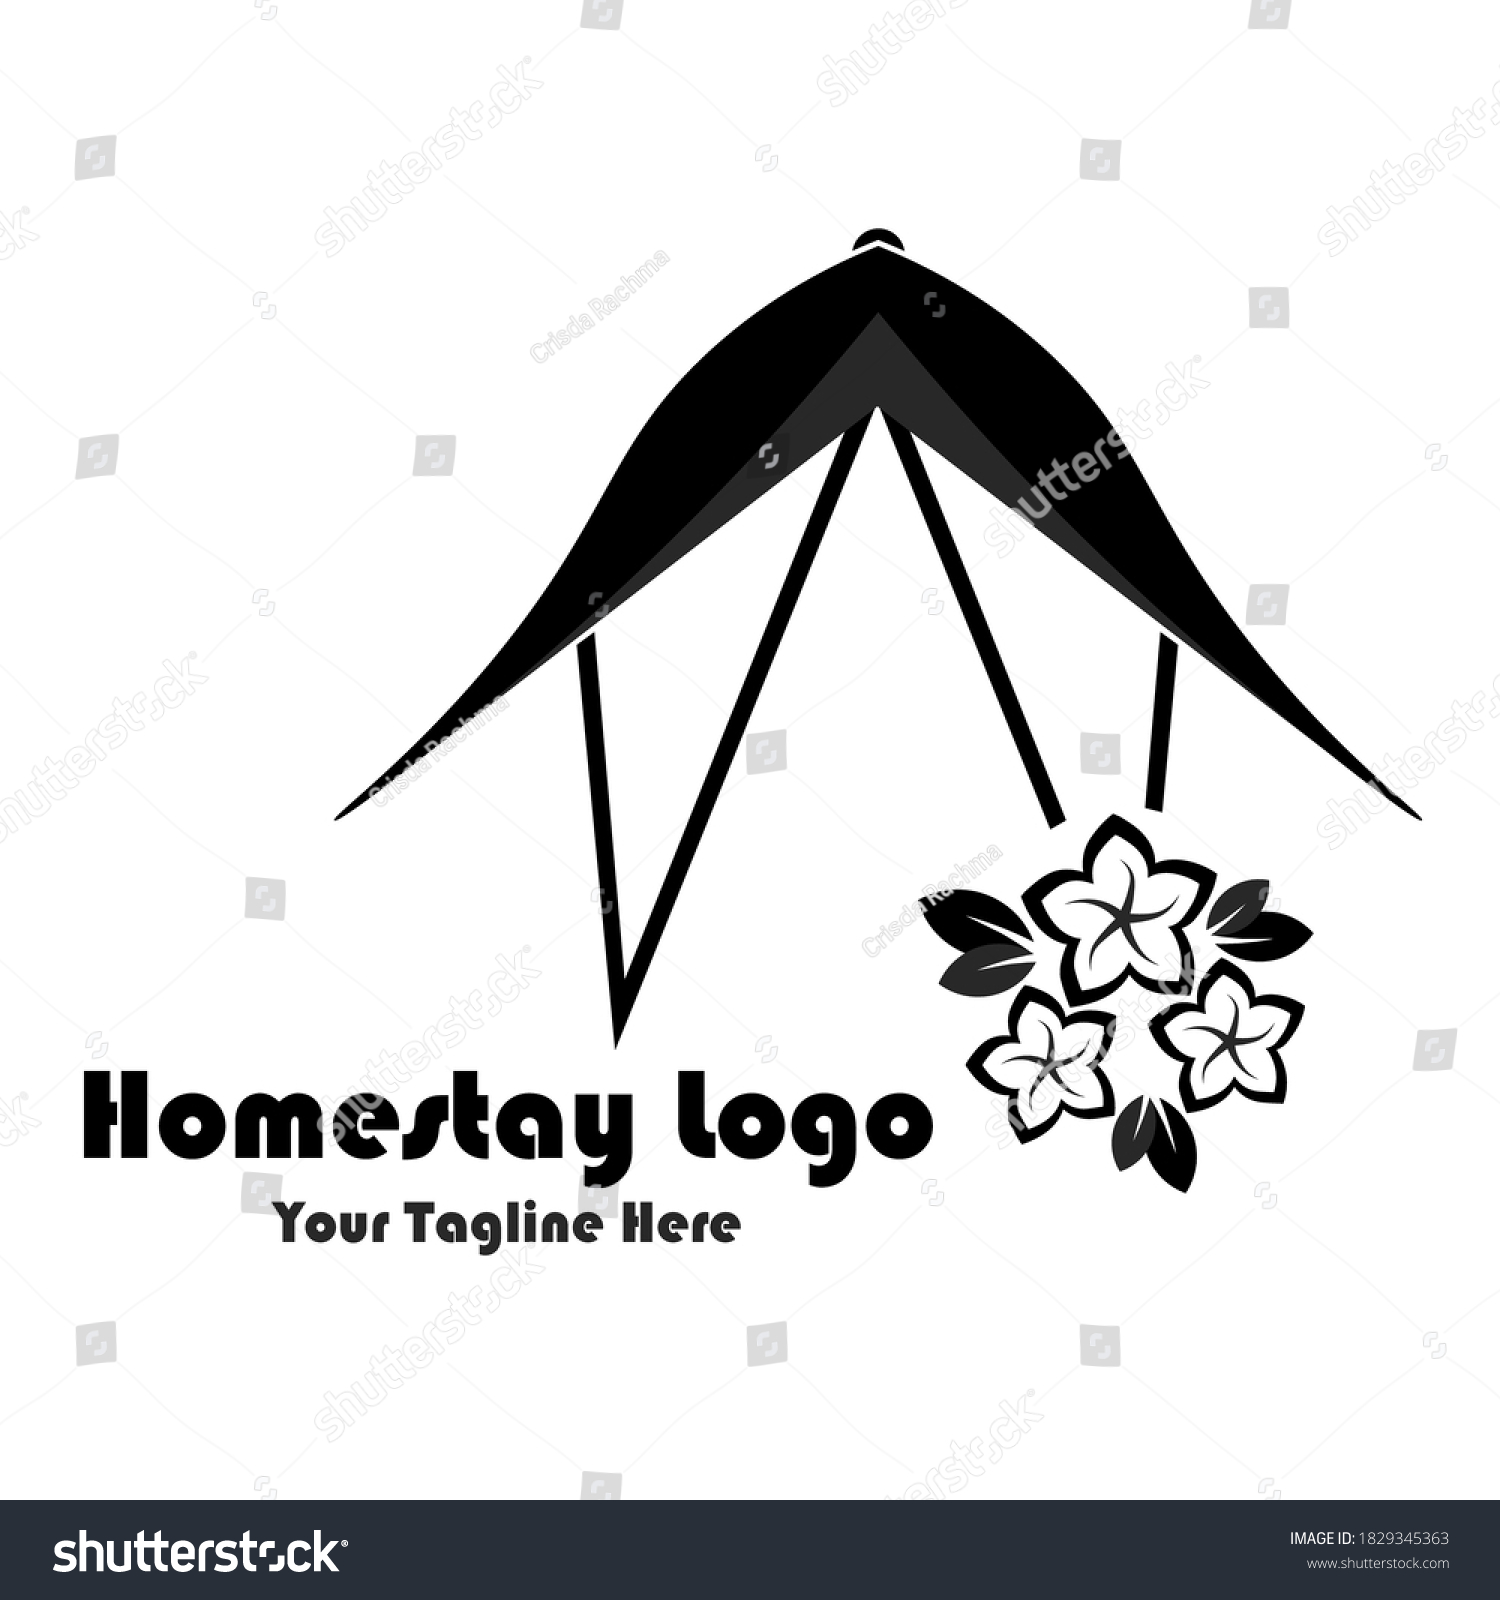 SVG of Hotel Homestay Logo With Shape Of House And Flowers svg